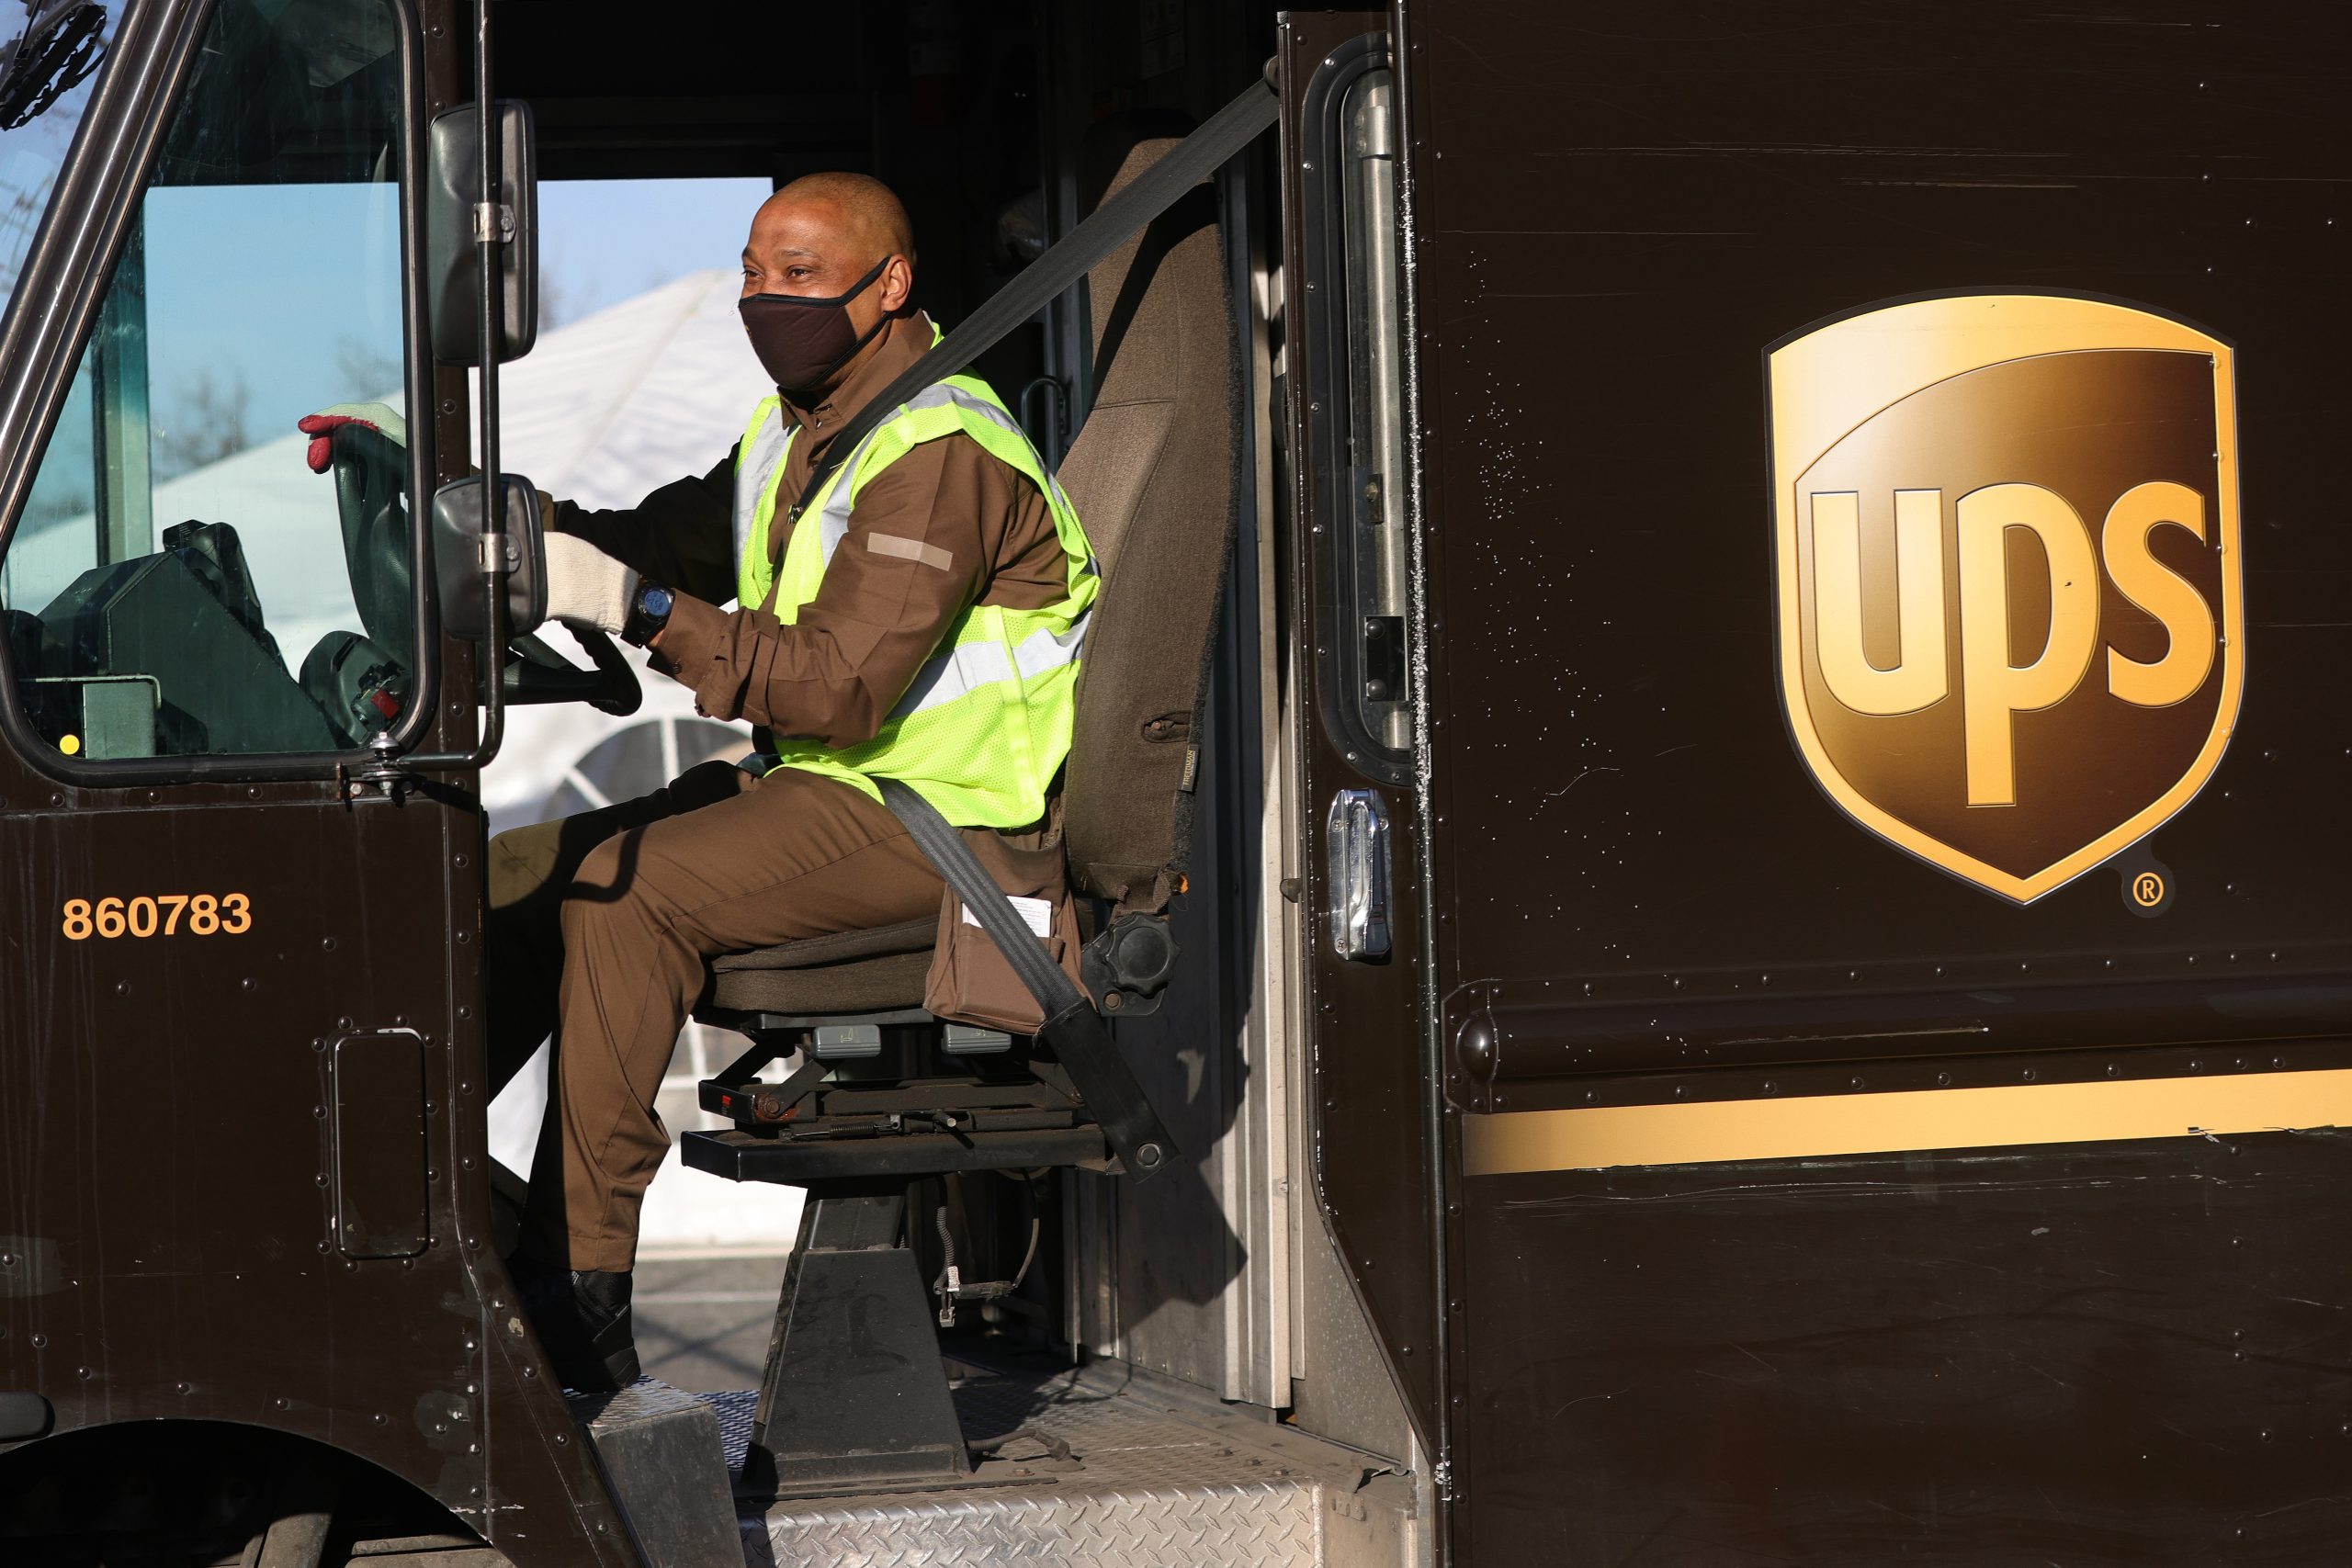 UPS workers compensation